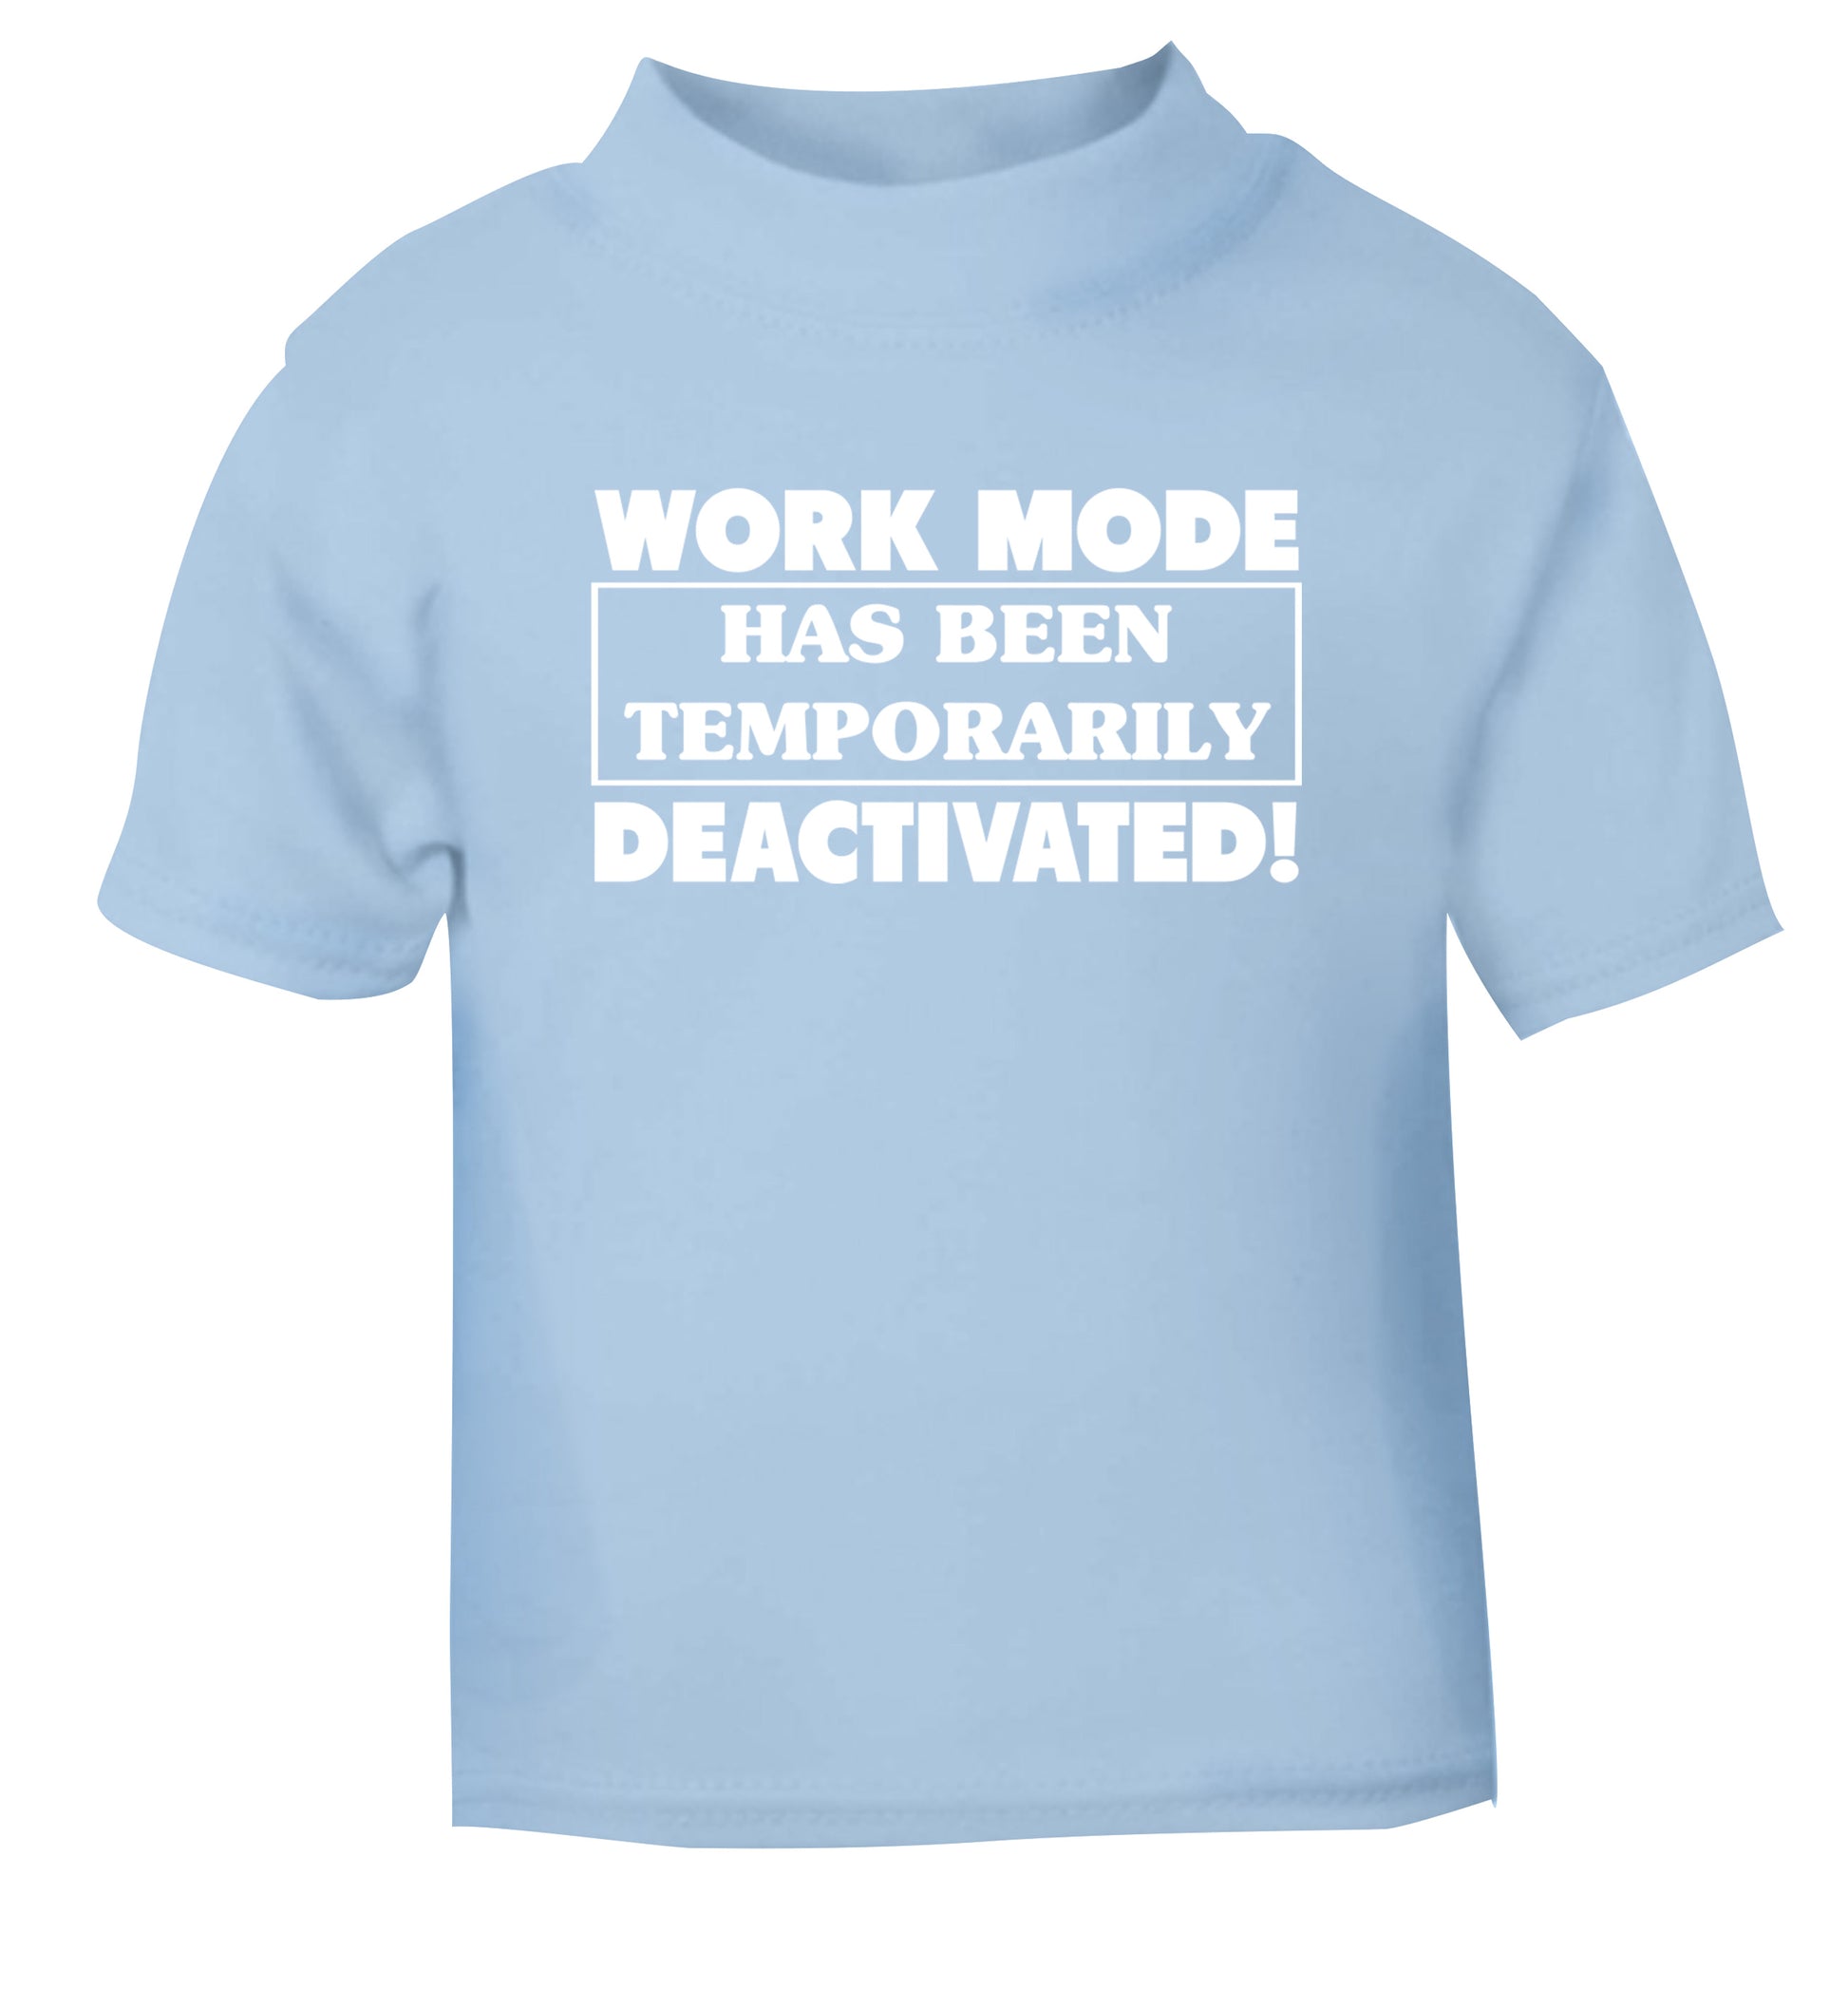 Work mode has now been temporarily deactivated light blue Baby Toddler Tshirt 2 Years